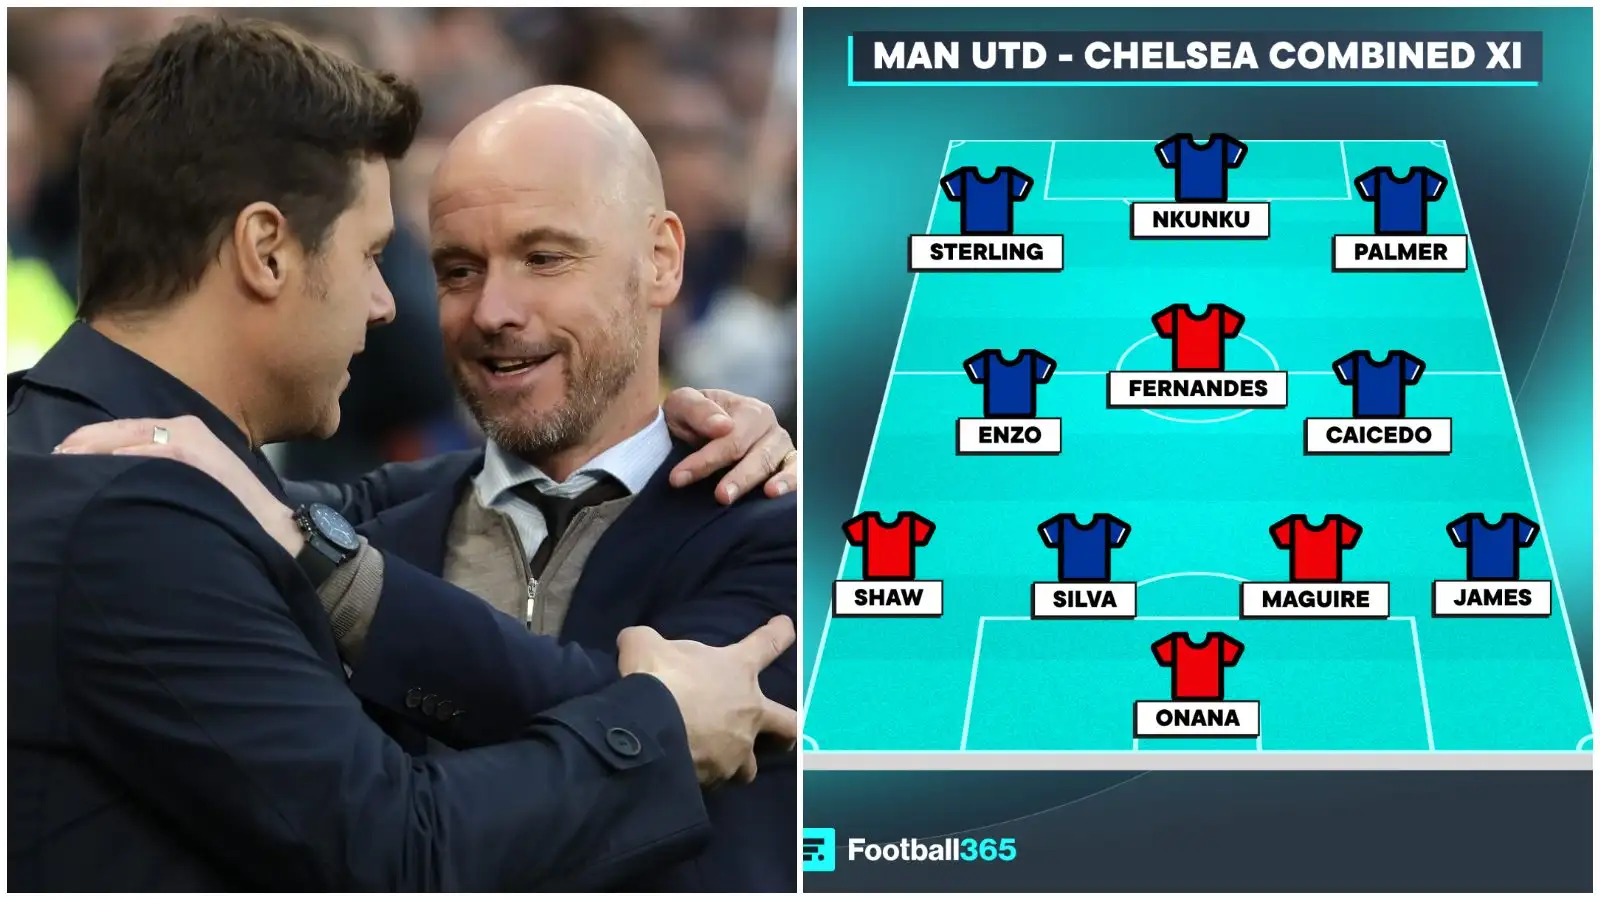 Our Manchester United - Chelsea combined XI.